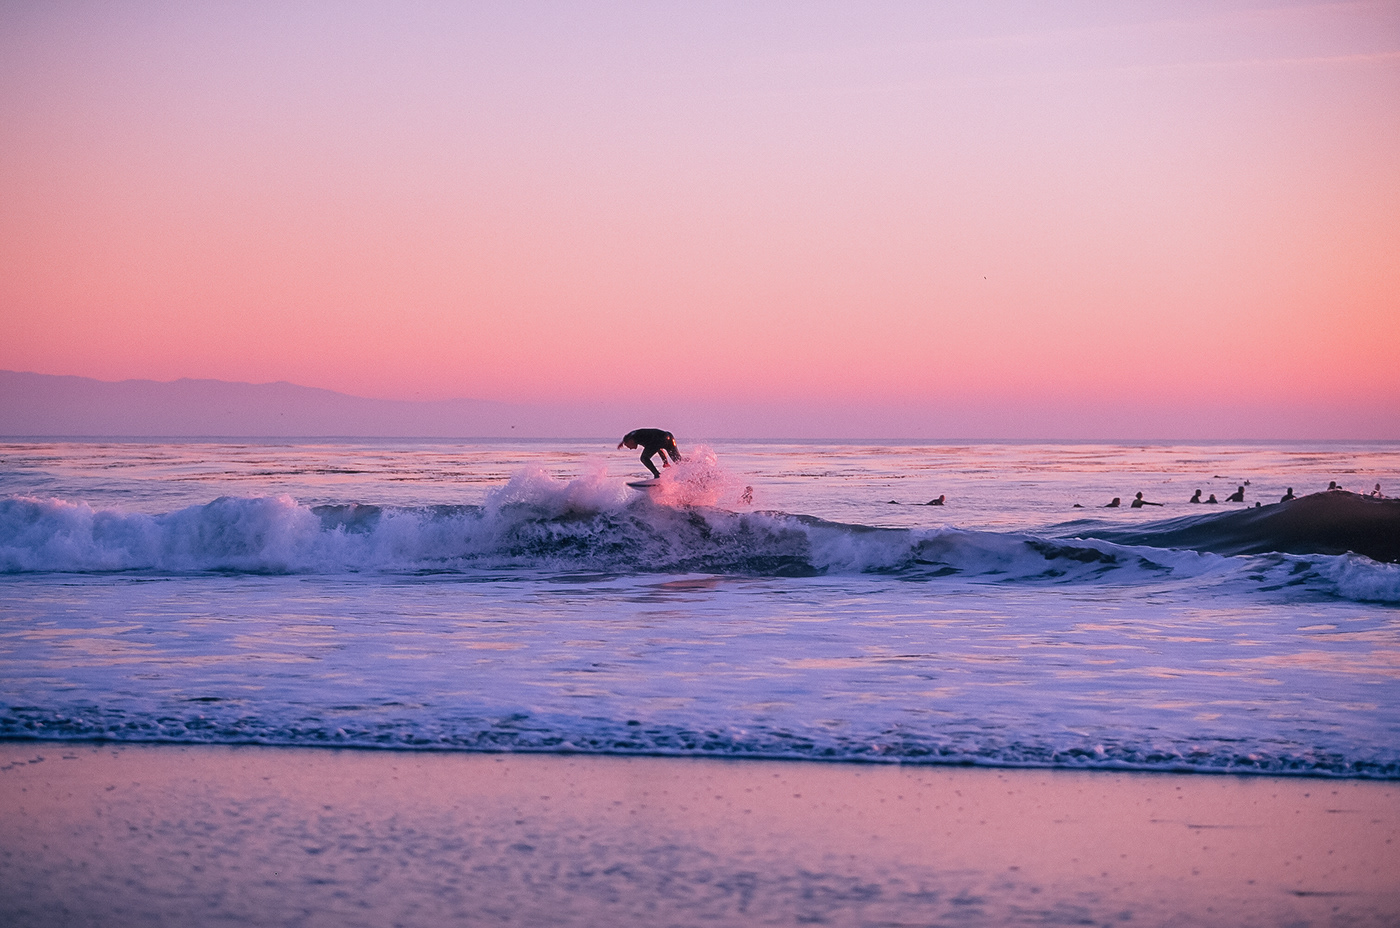 a surfer catches a pink wave at sunset
